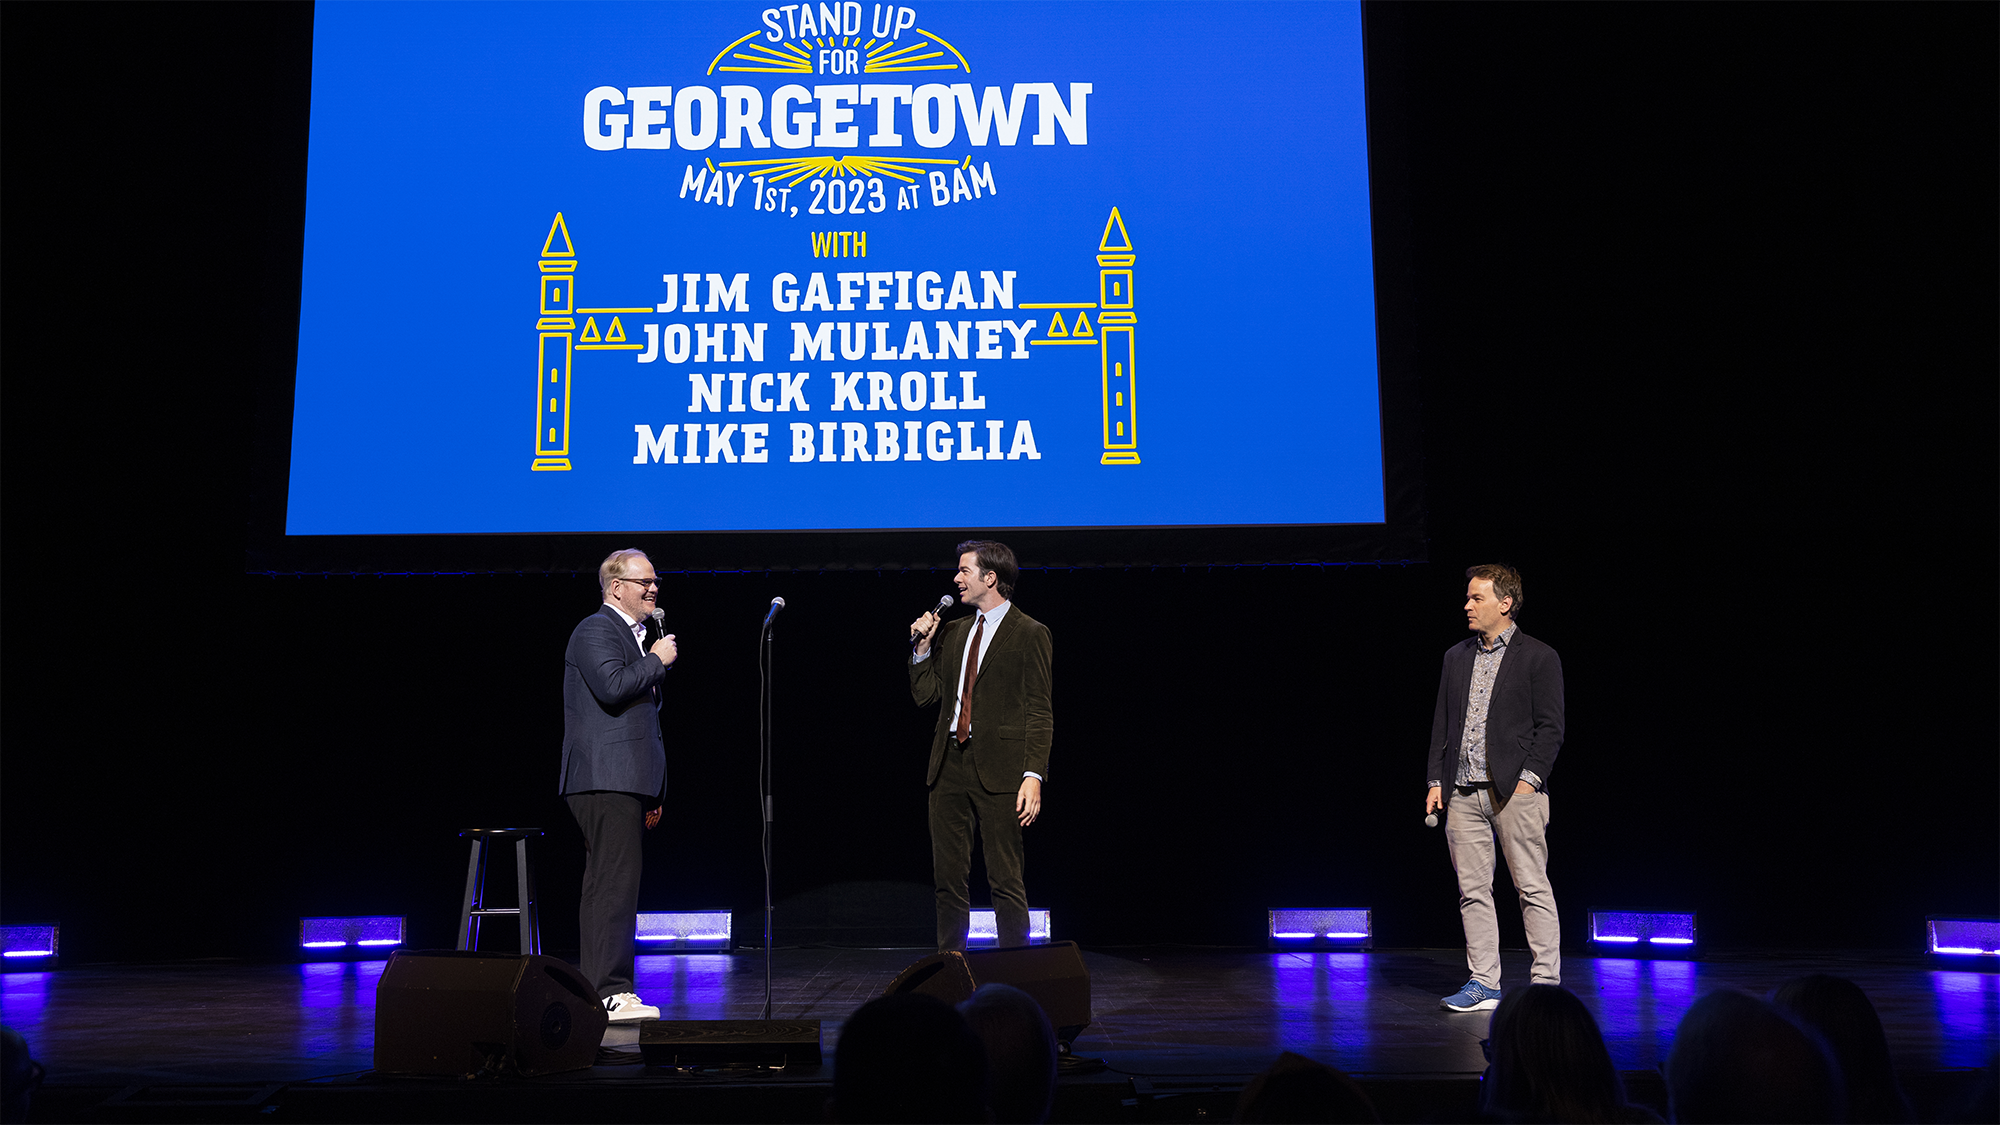 Jim Gaffigan, John Mulaney, and Mike Birbiglia onstage at Stand Up for Georgetown, May 1, 2023, at the Brooklyn Academy of Music